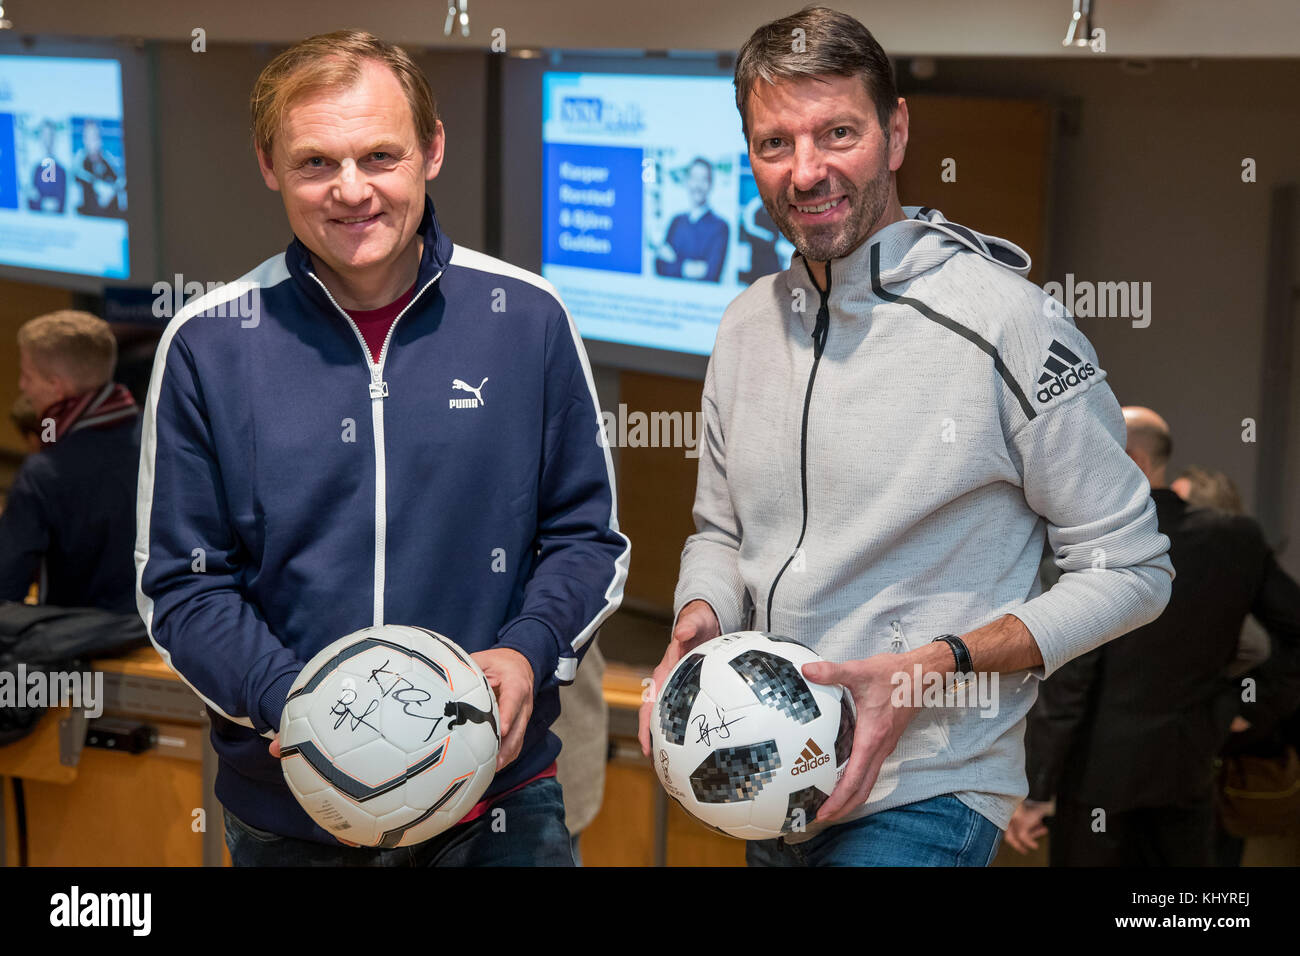 Nuremberg, Germany. 21st Nov, 2017. The CEOs of adidas, Kasper Rorsted (R), and Puma, Bjoern Gulden, stand to each other prior to a joint panel discussion of the 'Nuremberg News' in